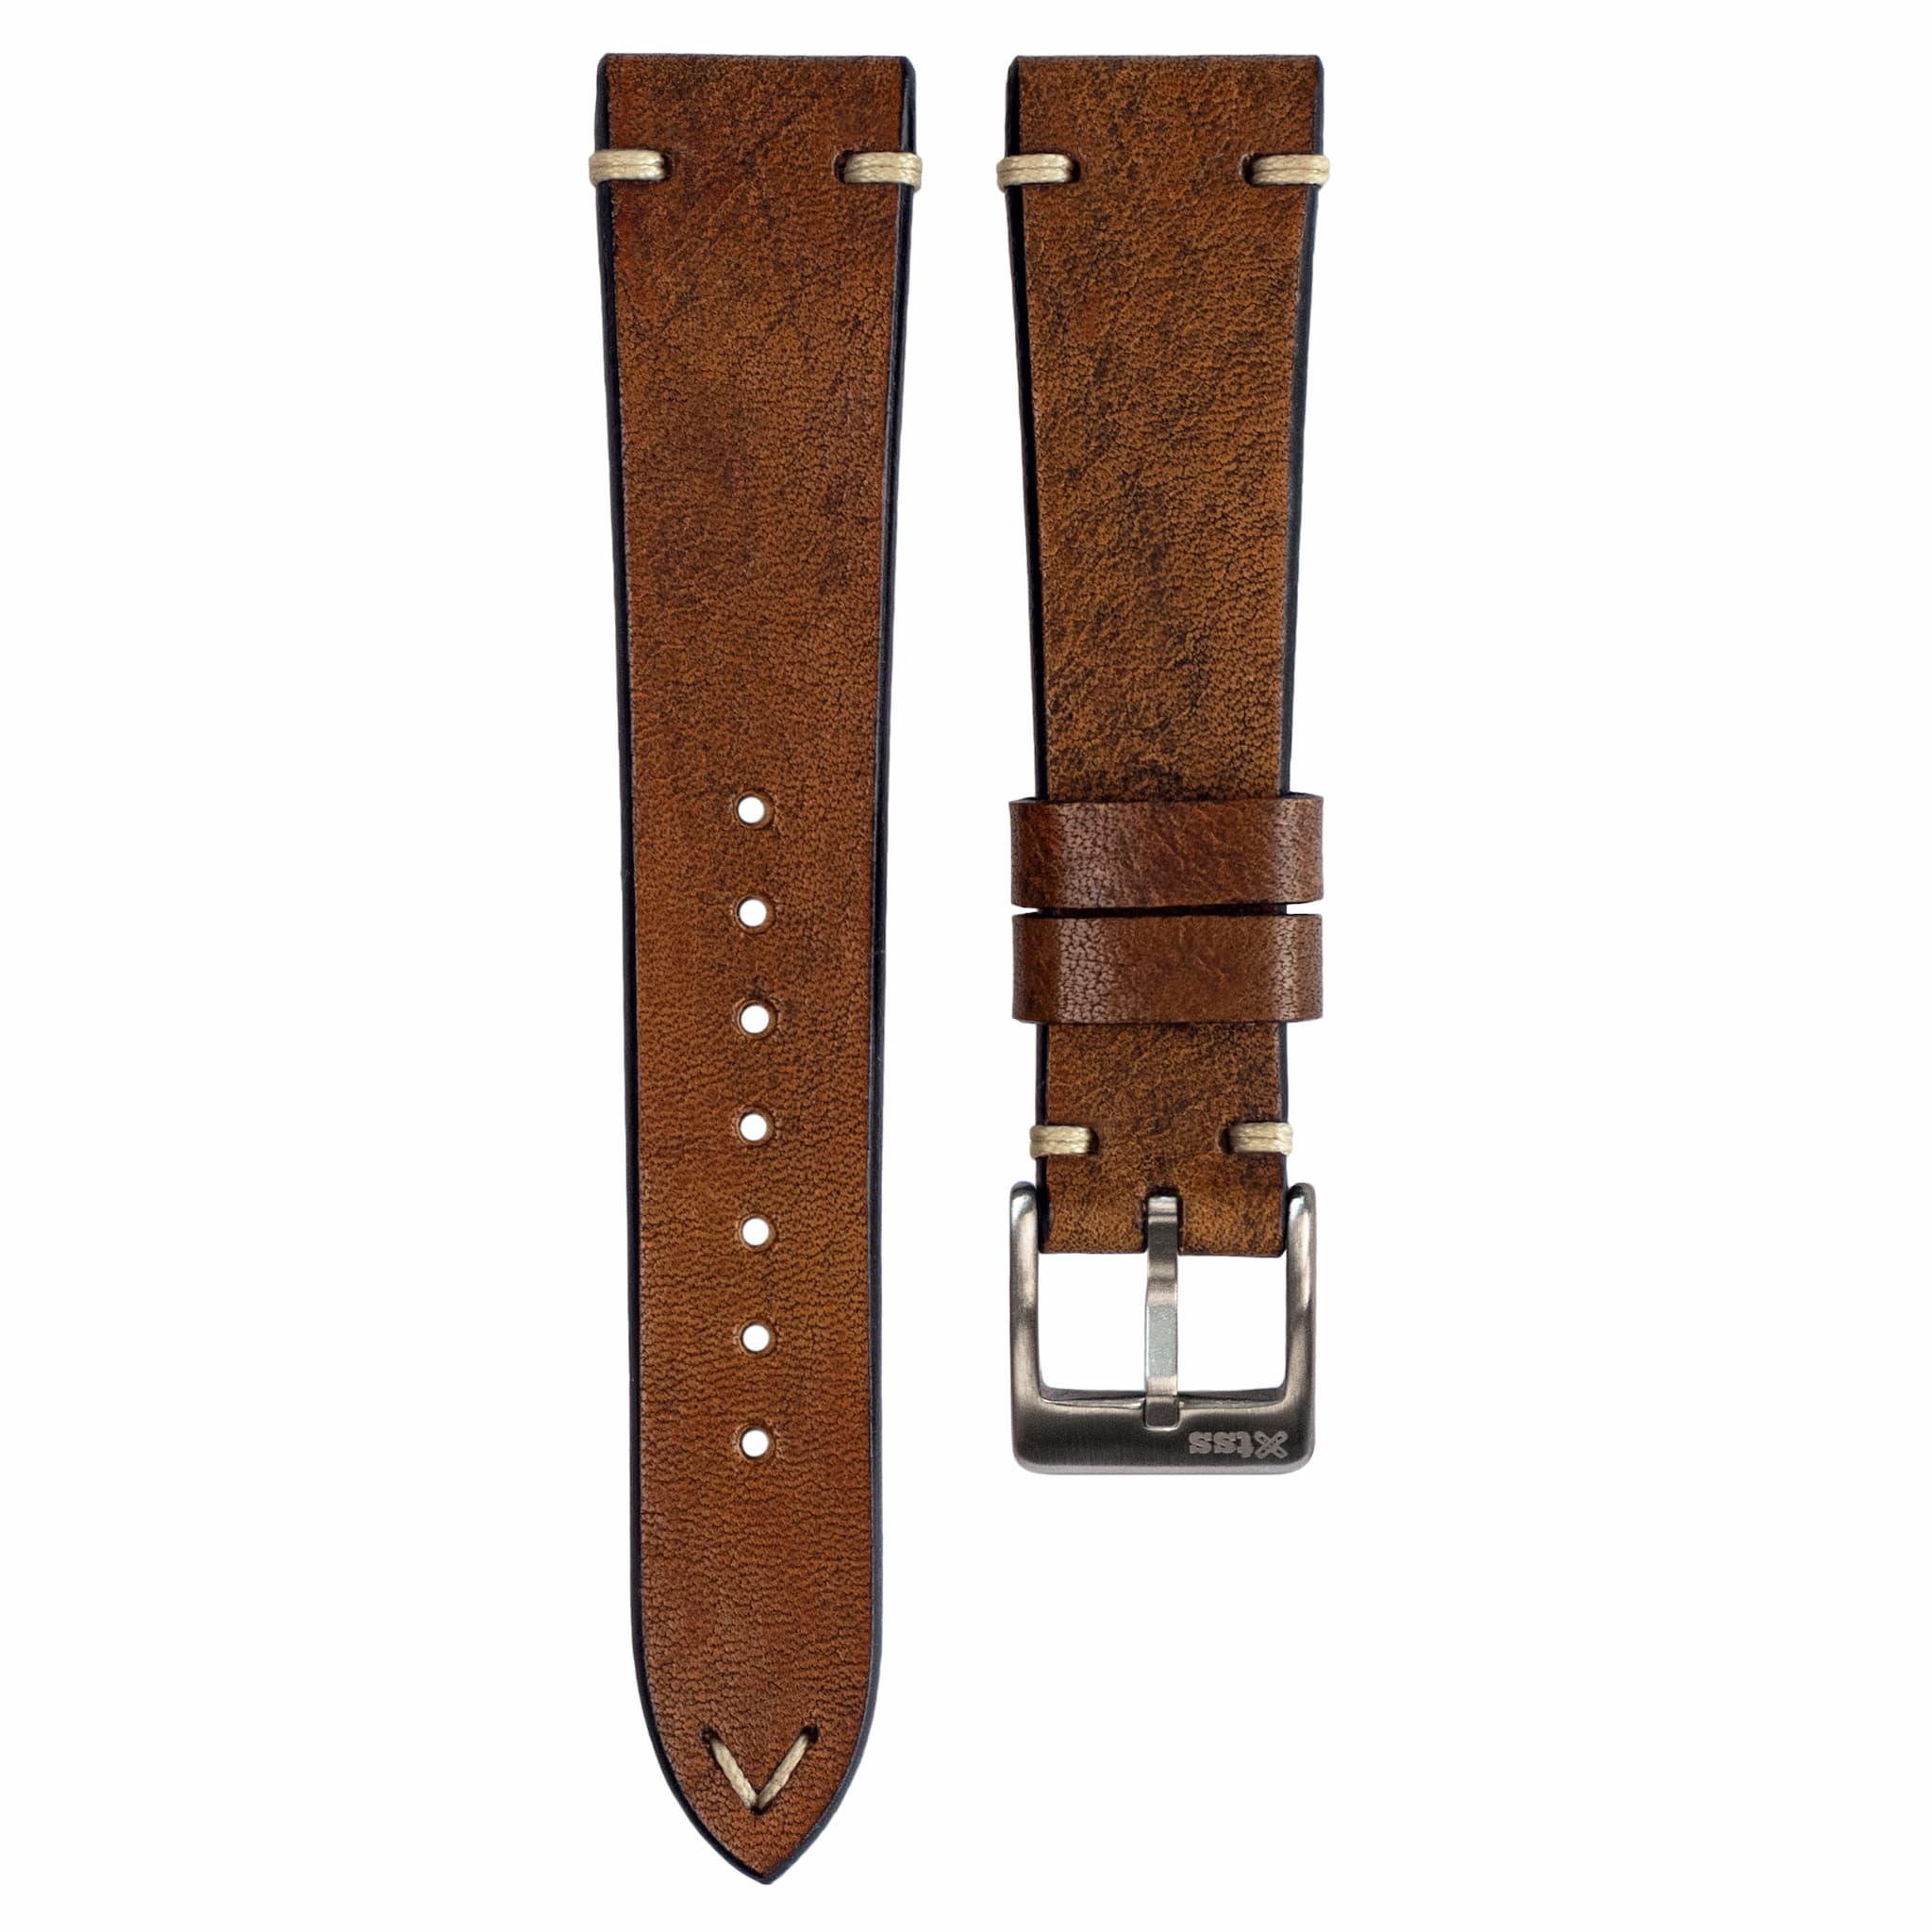 Two-Stitch Rustic Caramel Leather Watch Strap